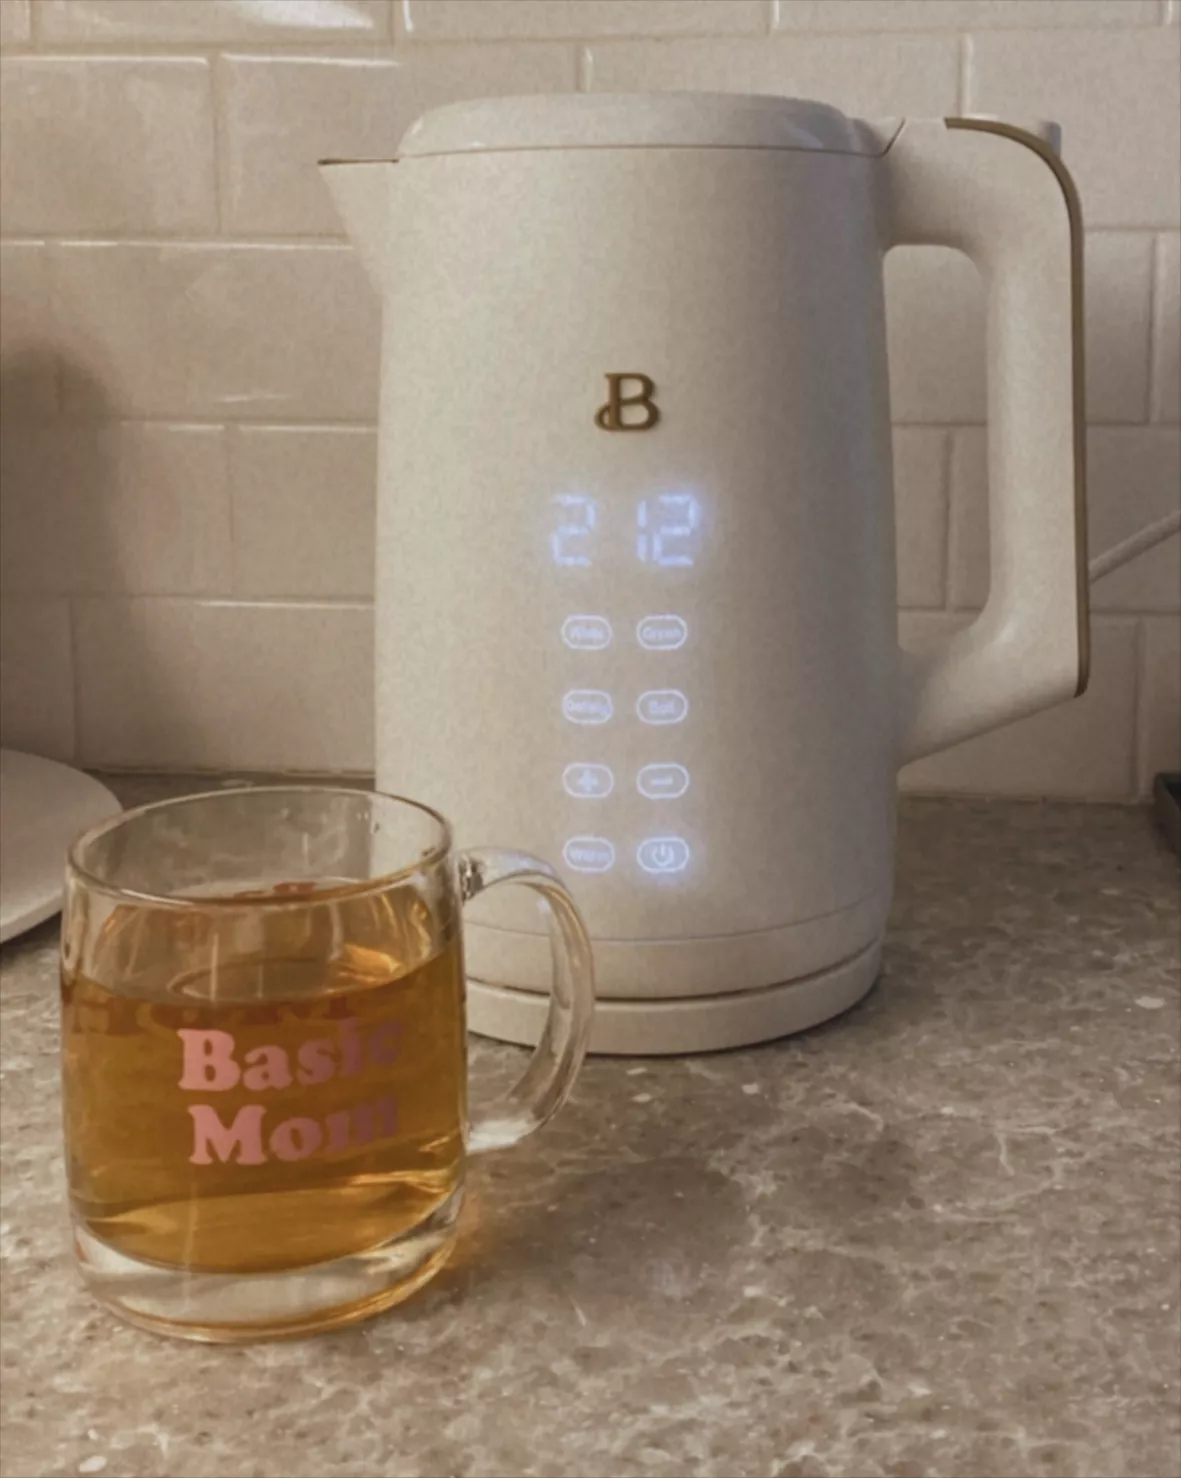 Drew Barrymore Beautiful 1.7L One-Touch Electric Kettle, White